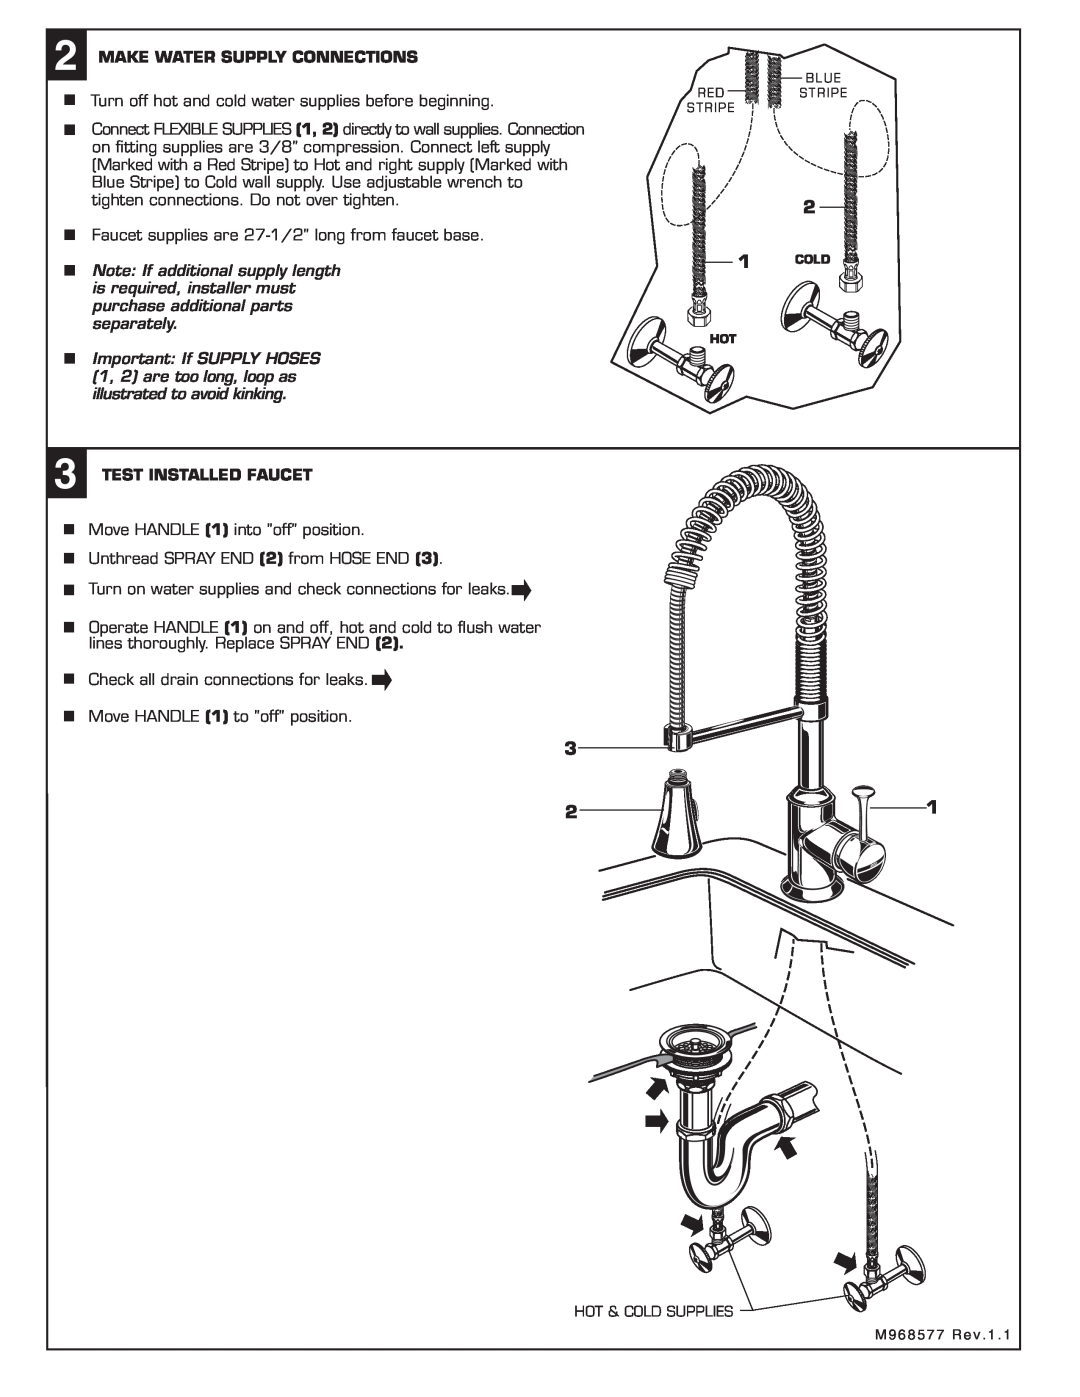 American Standard 4332.350.XXX installation instructions Make Water Supply Connections, Test Installed Faucet 